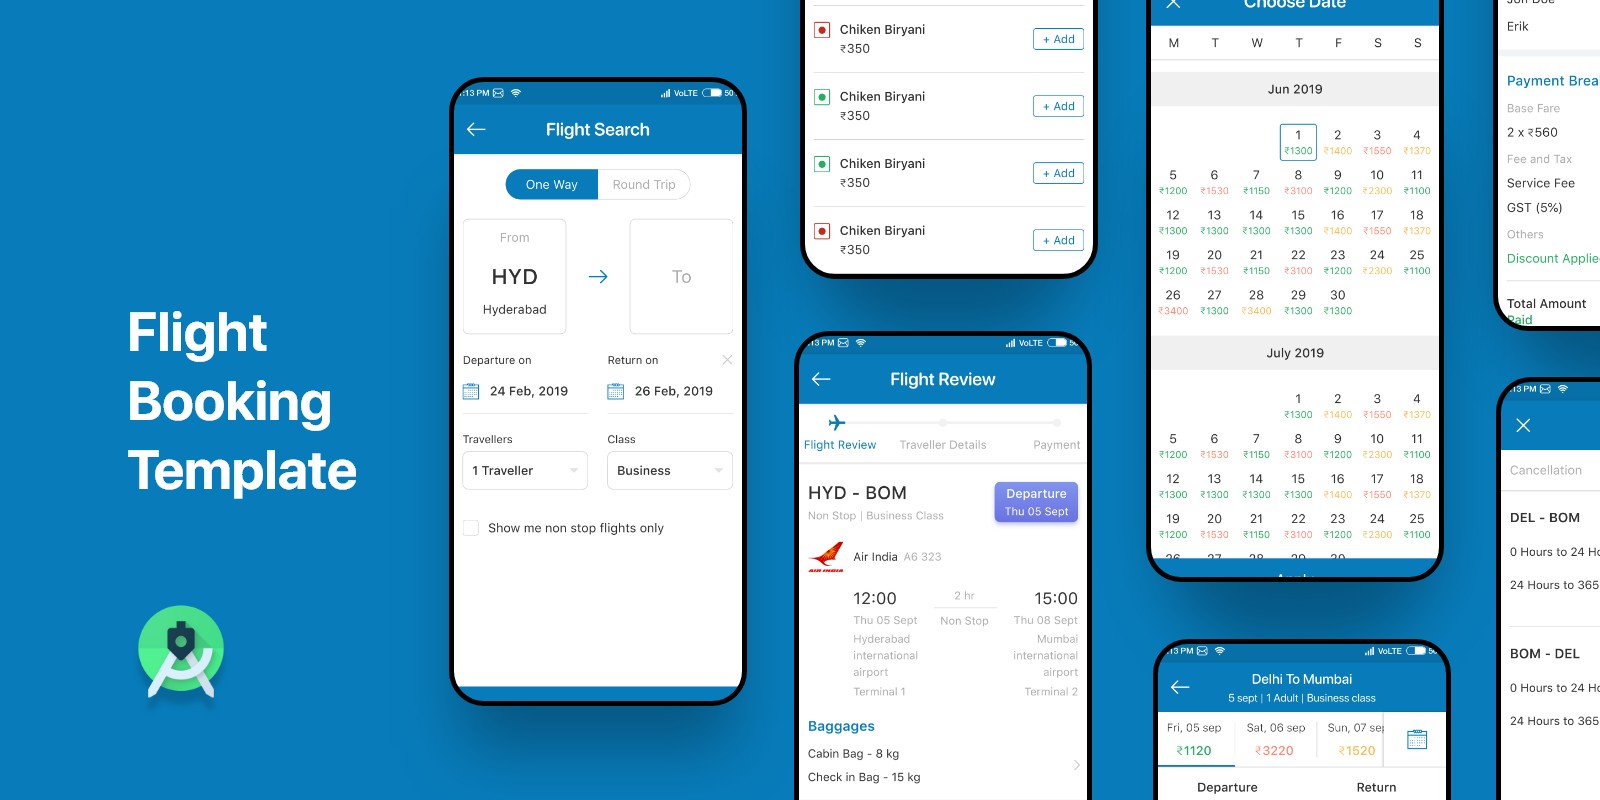 Flight Booking Android Studio Ui Template By Rushabhpatel381